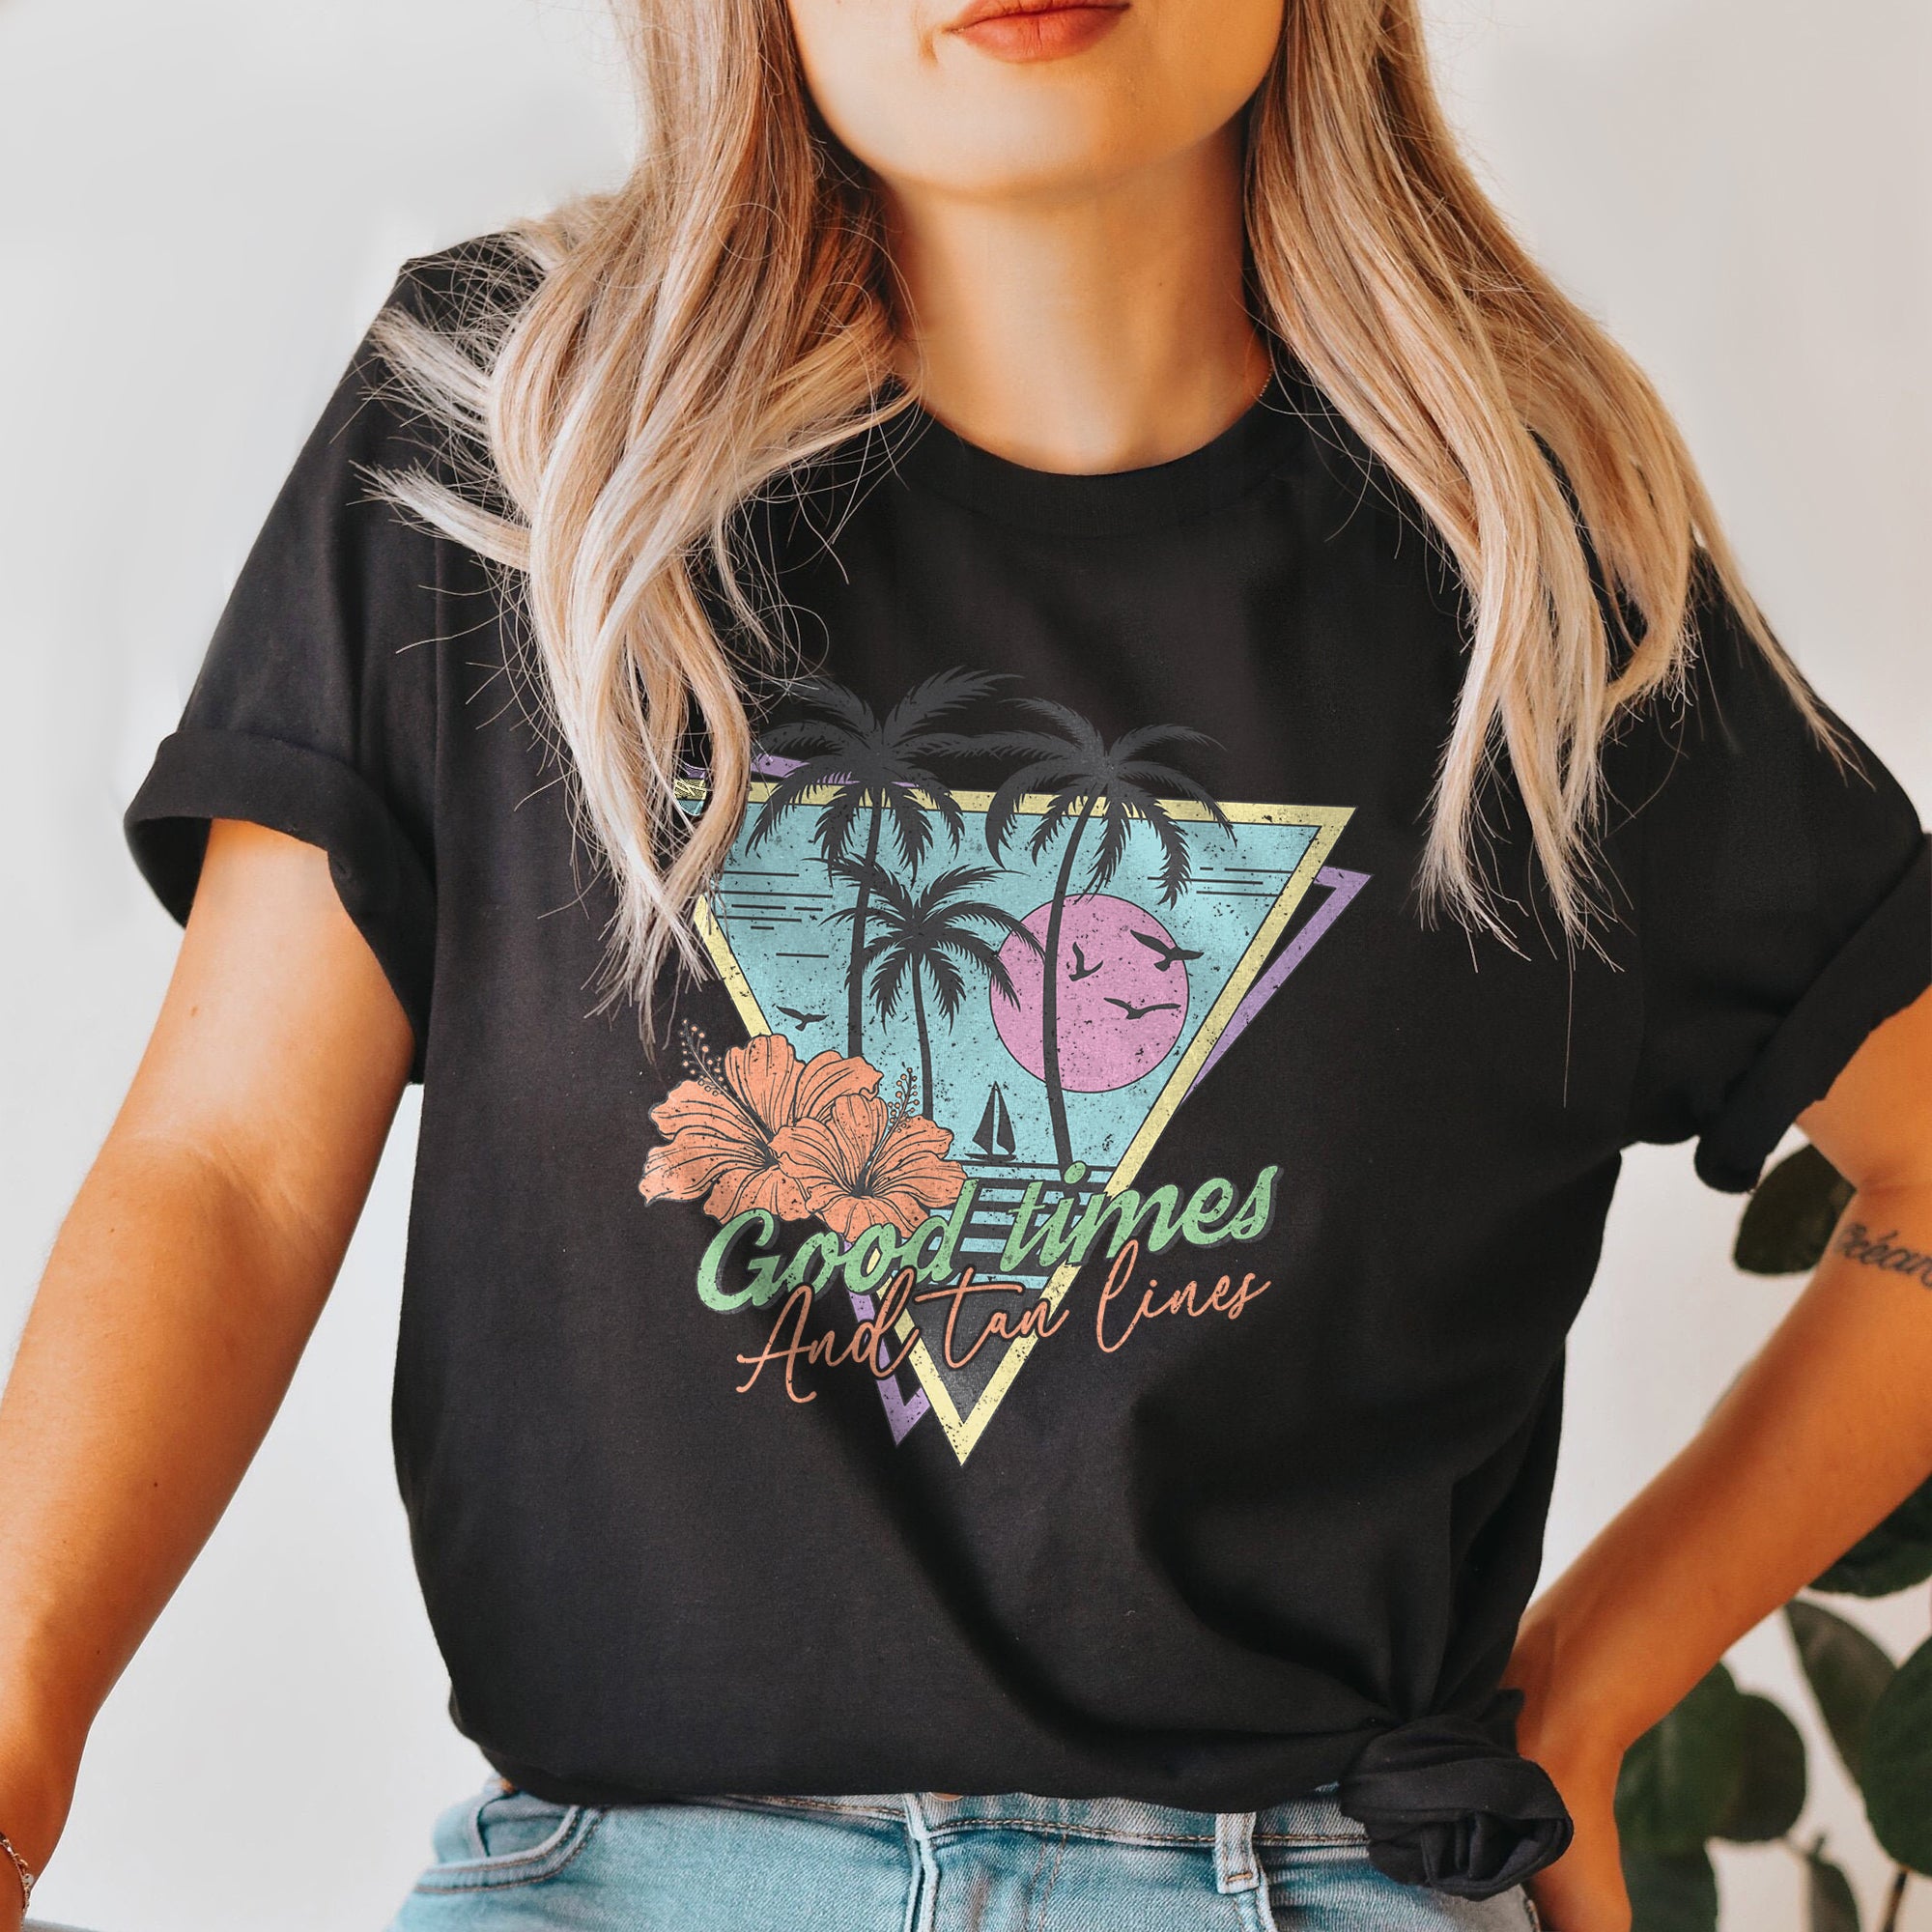 Good Times and Tan Lines Oversized Shirt for Women Garment-Dyed Graphic Tee